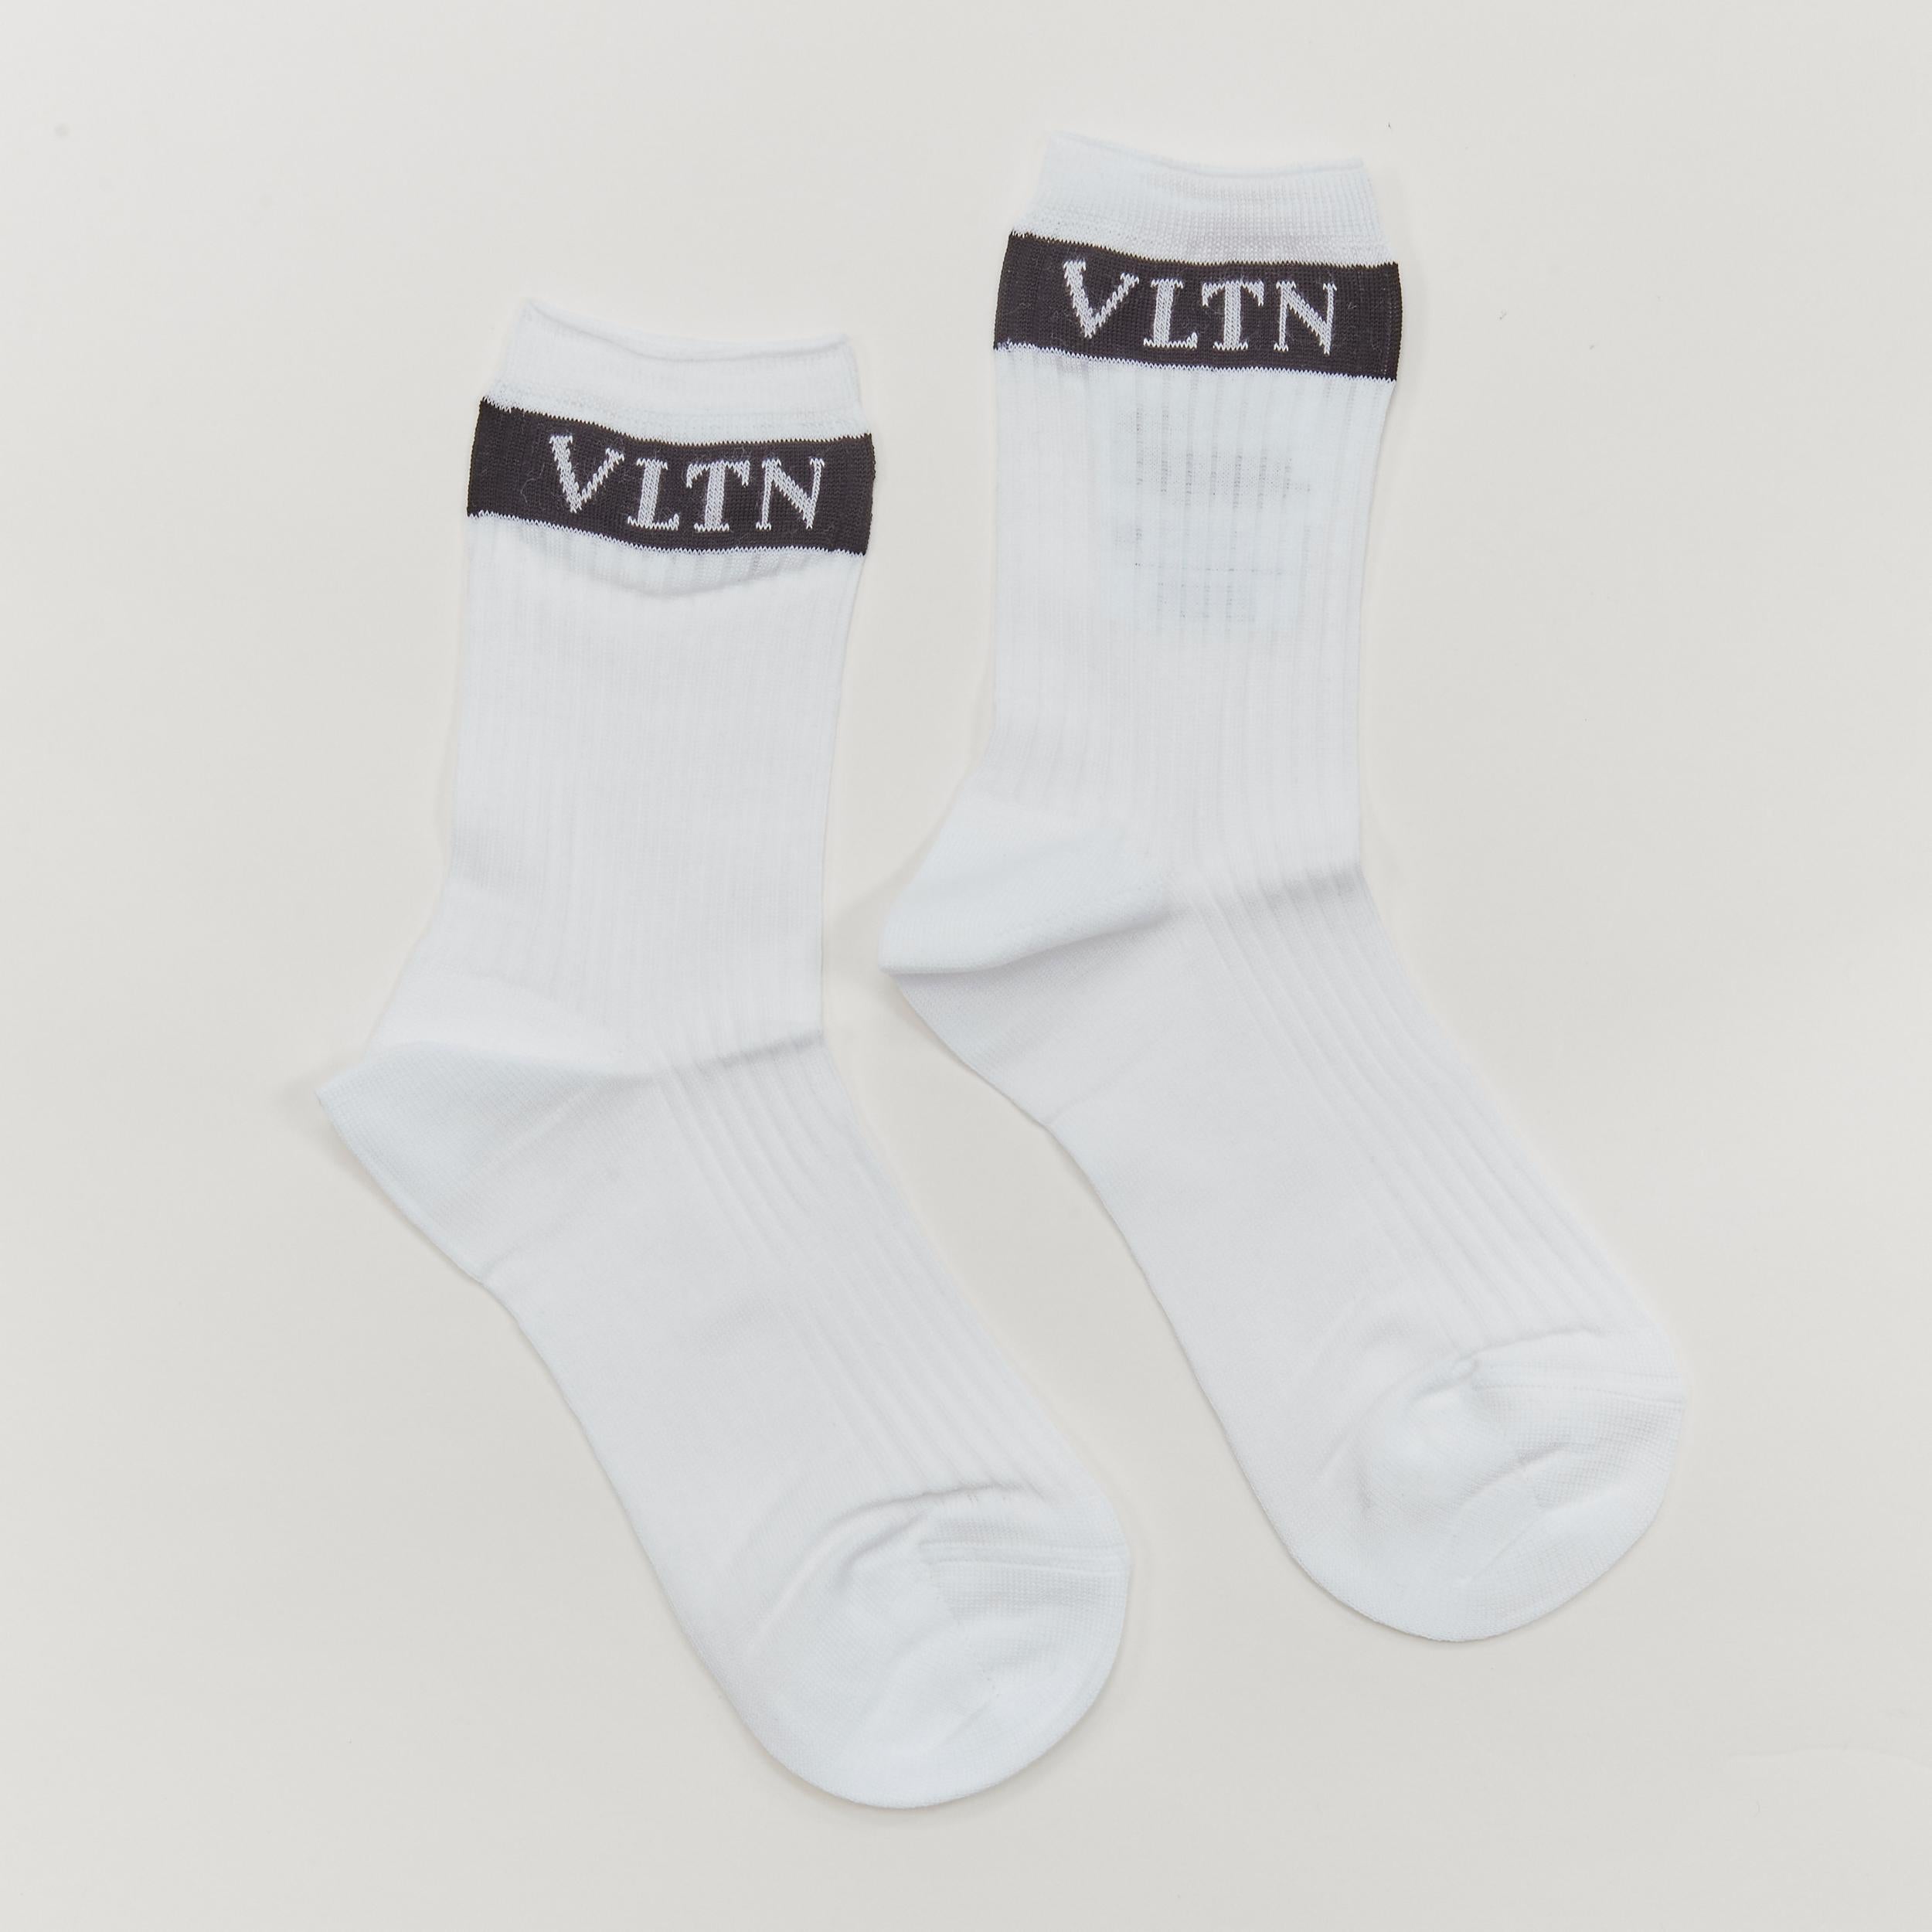 new VALENTINO VLTN black box logo stripe white cotton socks 
Reference: ANWU/A00100 
Brand: Valentino 
Material: Cotton 
Color: White 
Pattern: Solid 
Extra Detail: Comes with Valentino paper envelope packaging 

CONDITION: 
Condition: New without